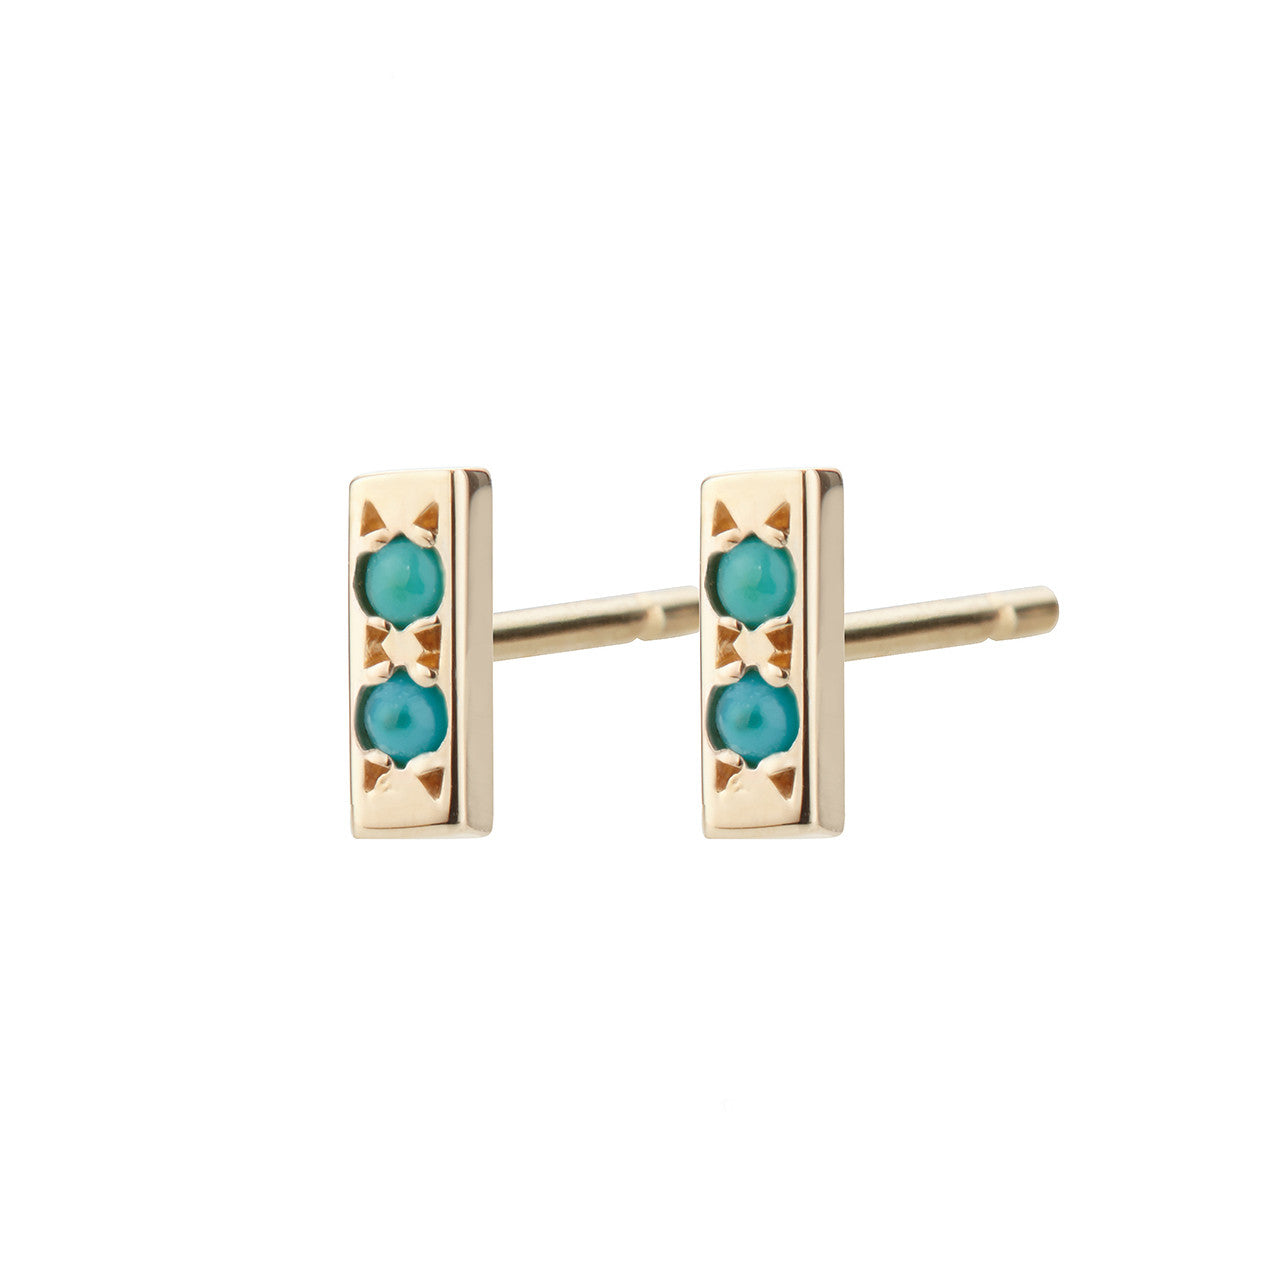 Bar studs with turquoise